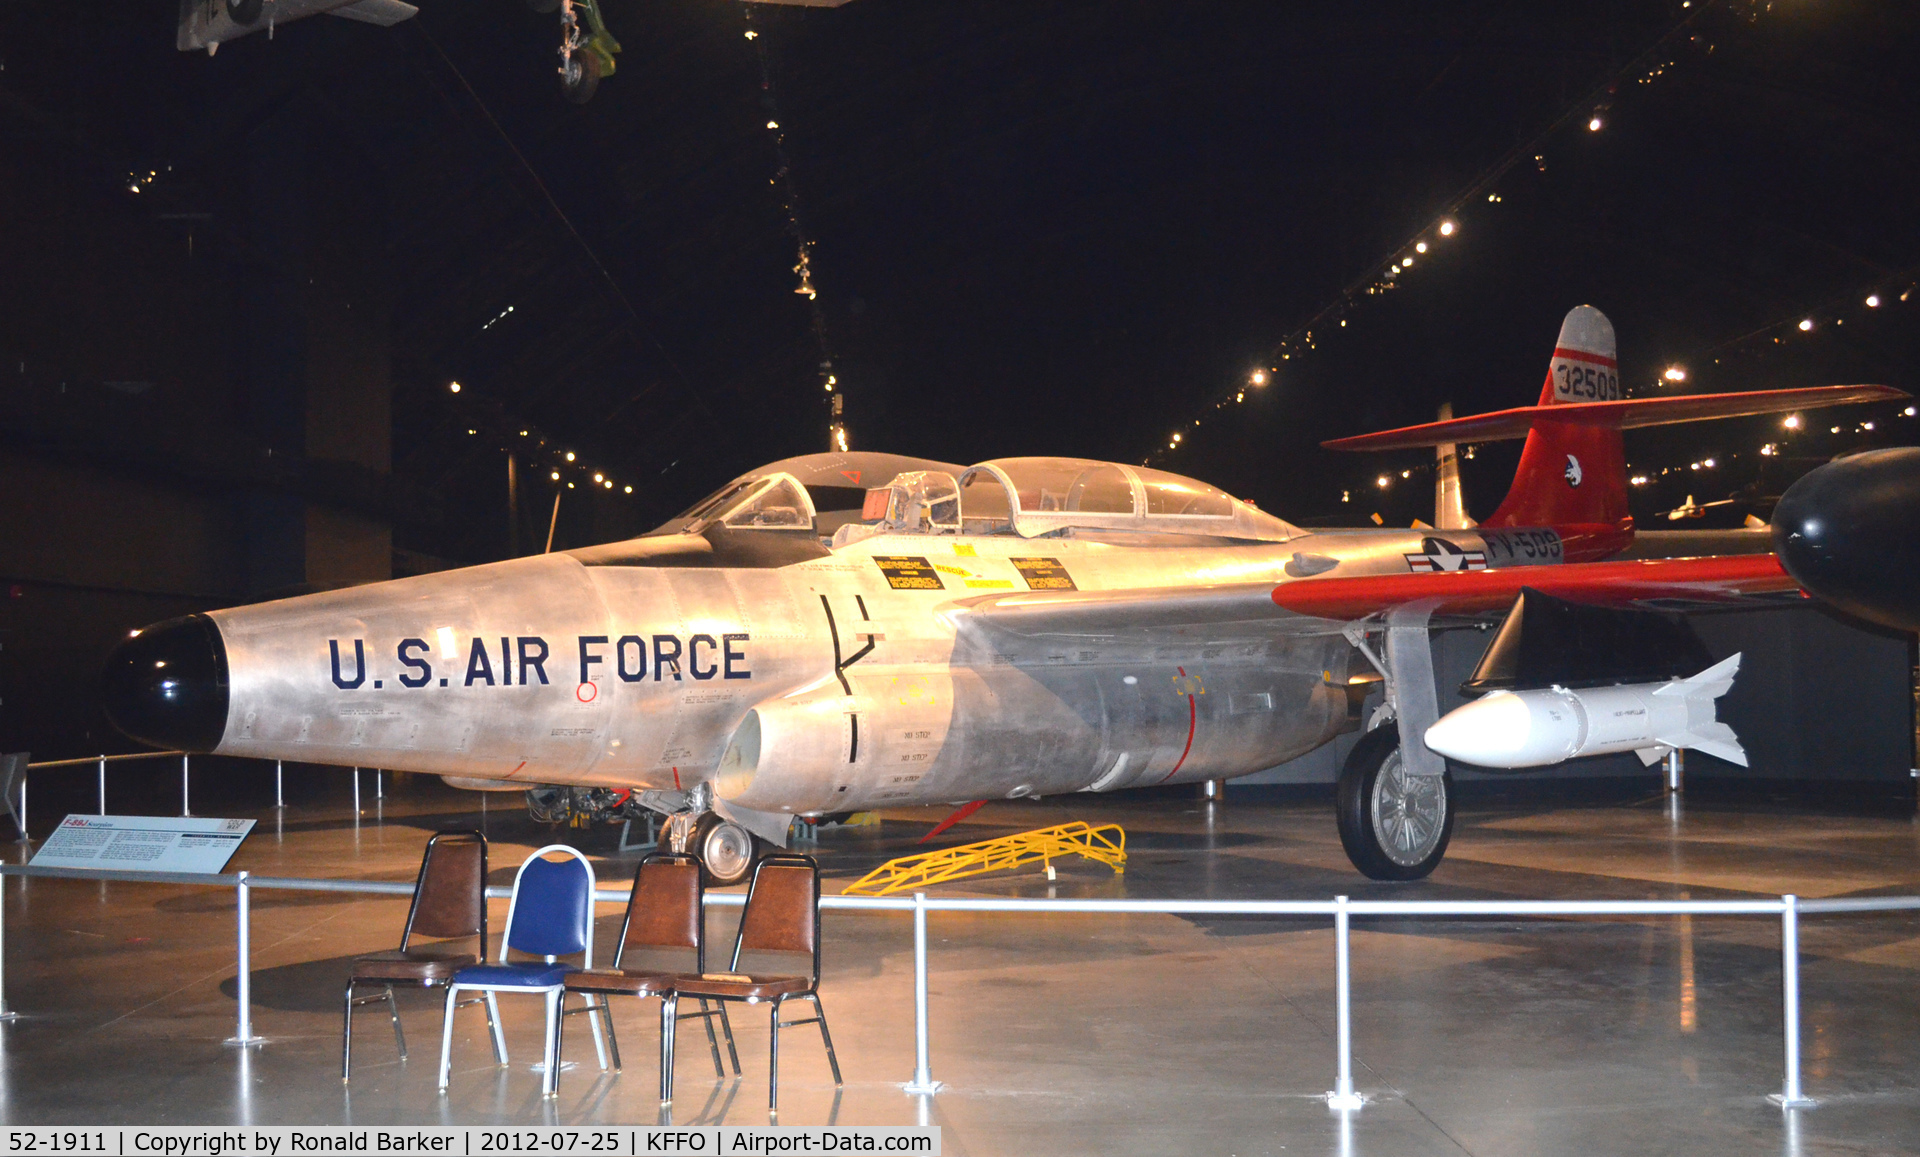 52-1911, 1952 Northrop F-89D Scorpion C/N Not found 52-1911, AF Museum shown as 53-2509